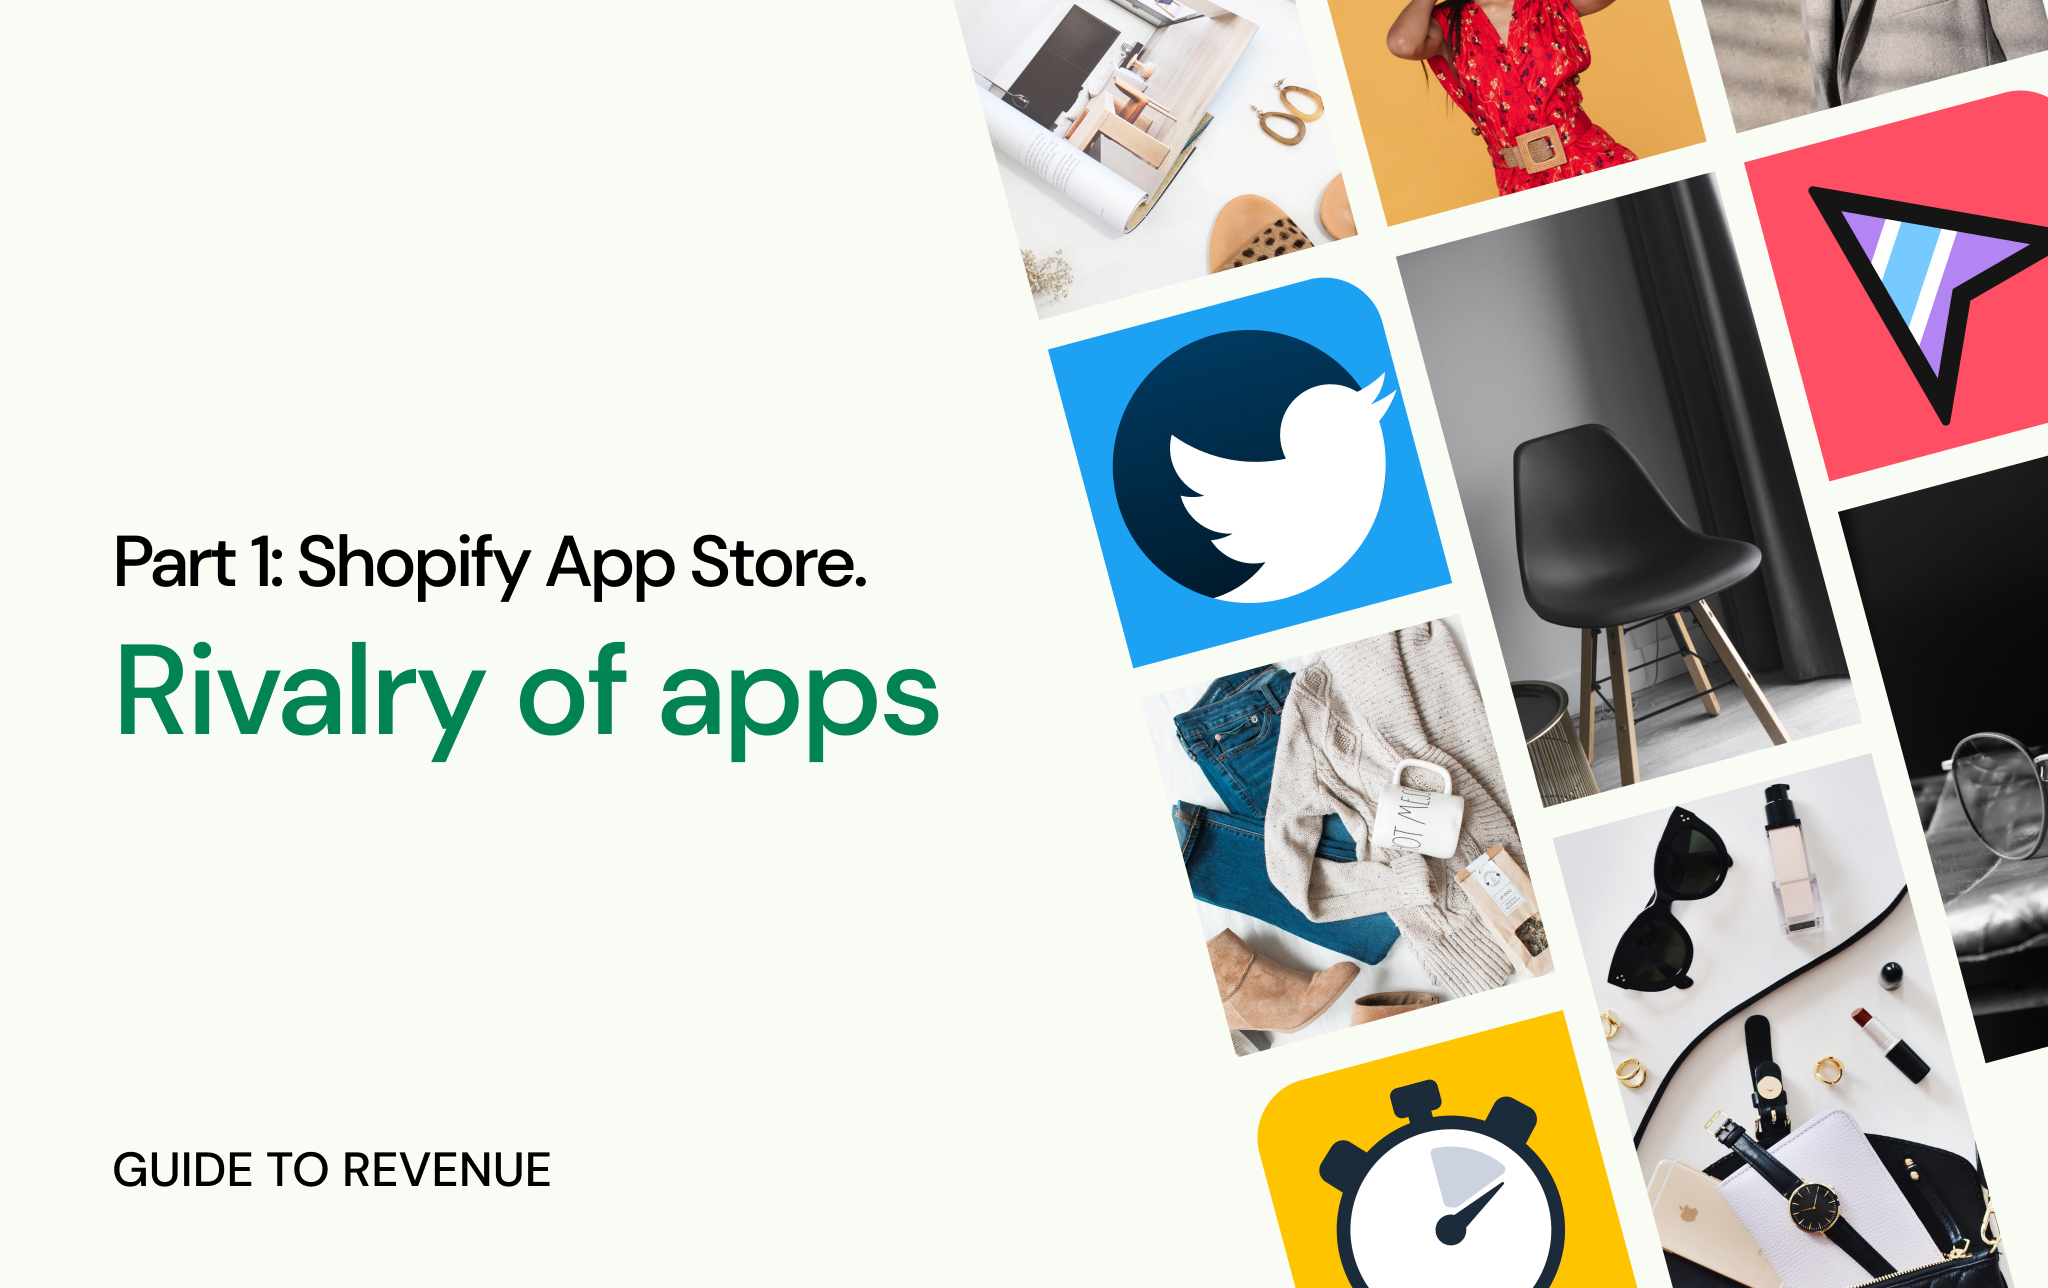 Shopify App Store. Guide to revenue. Rivalry of apps